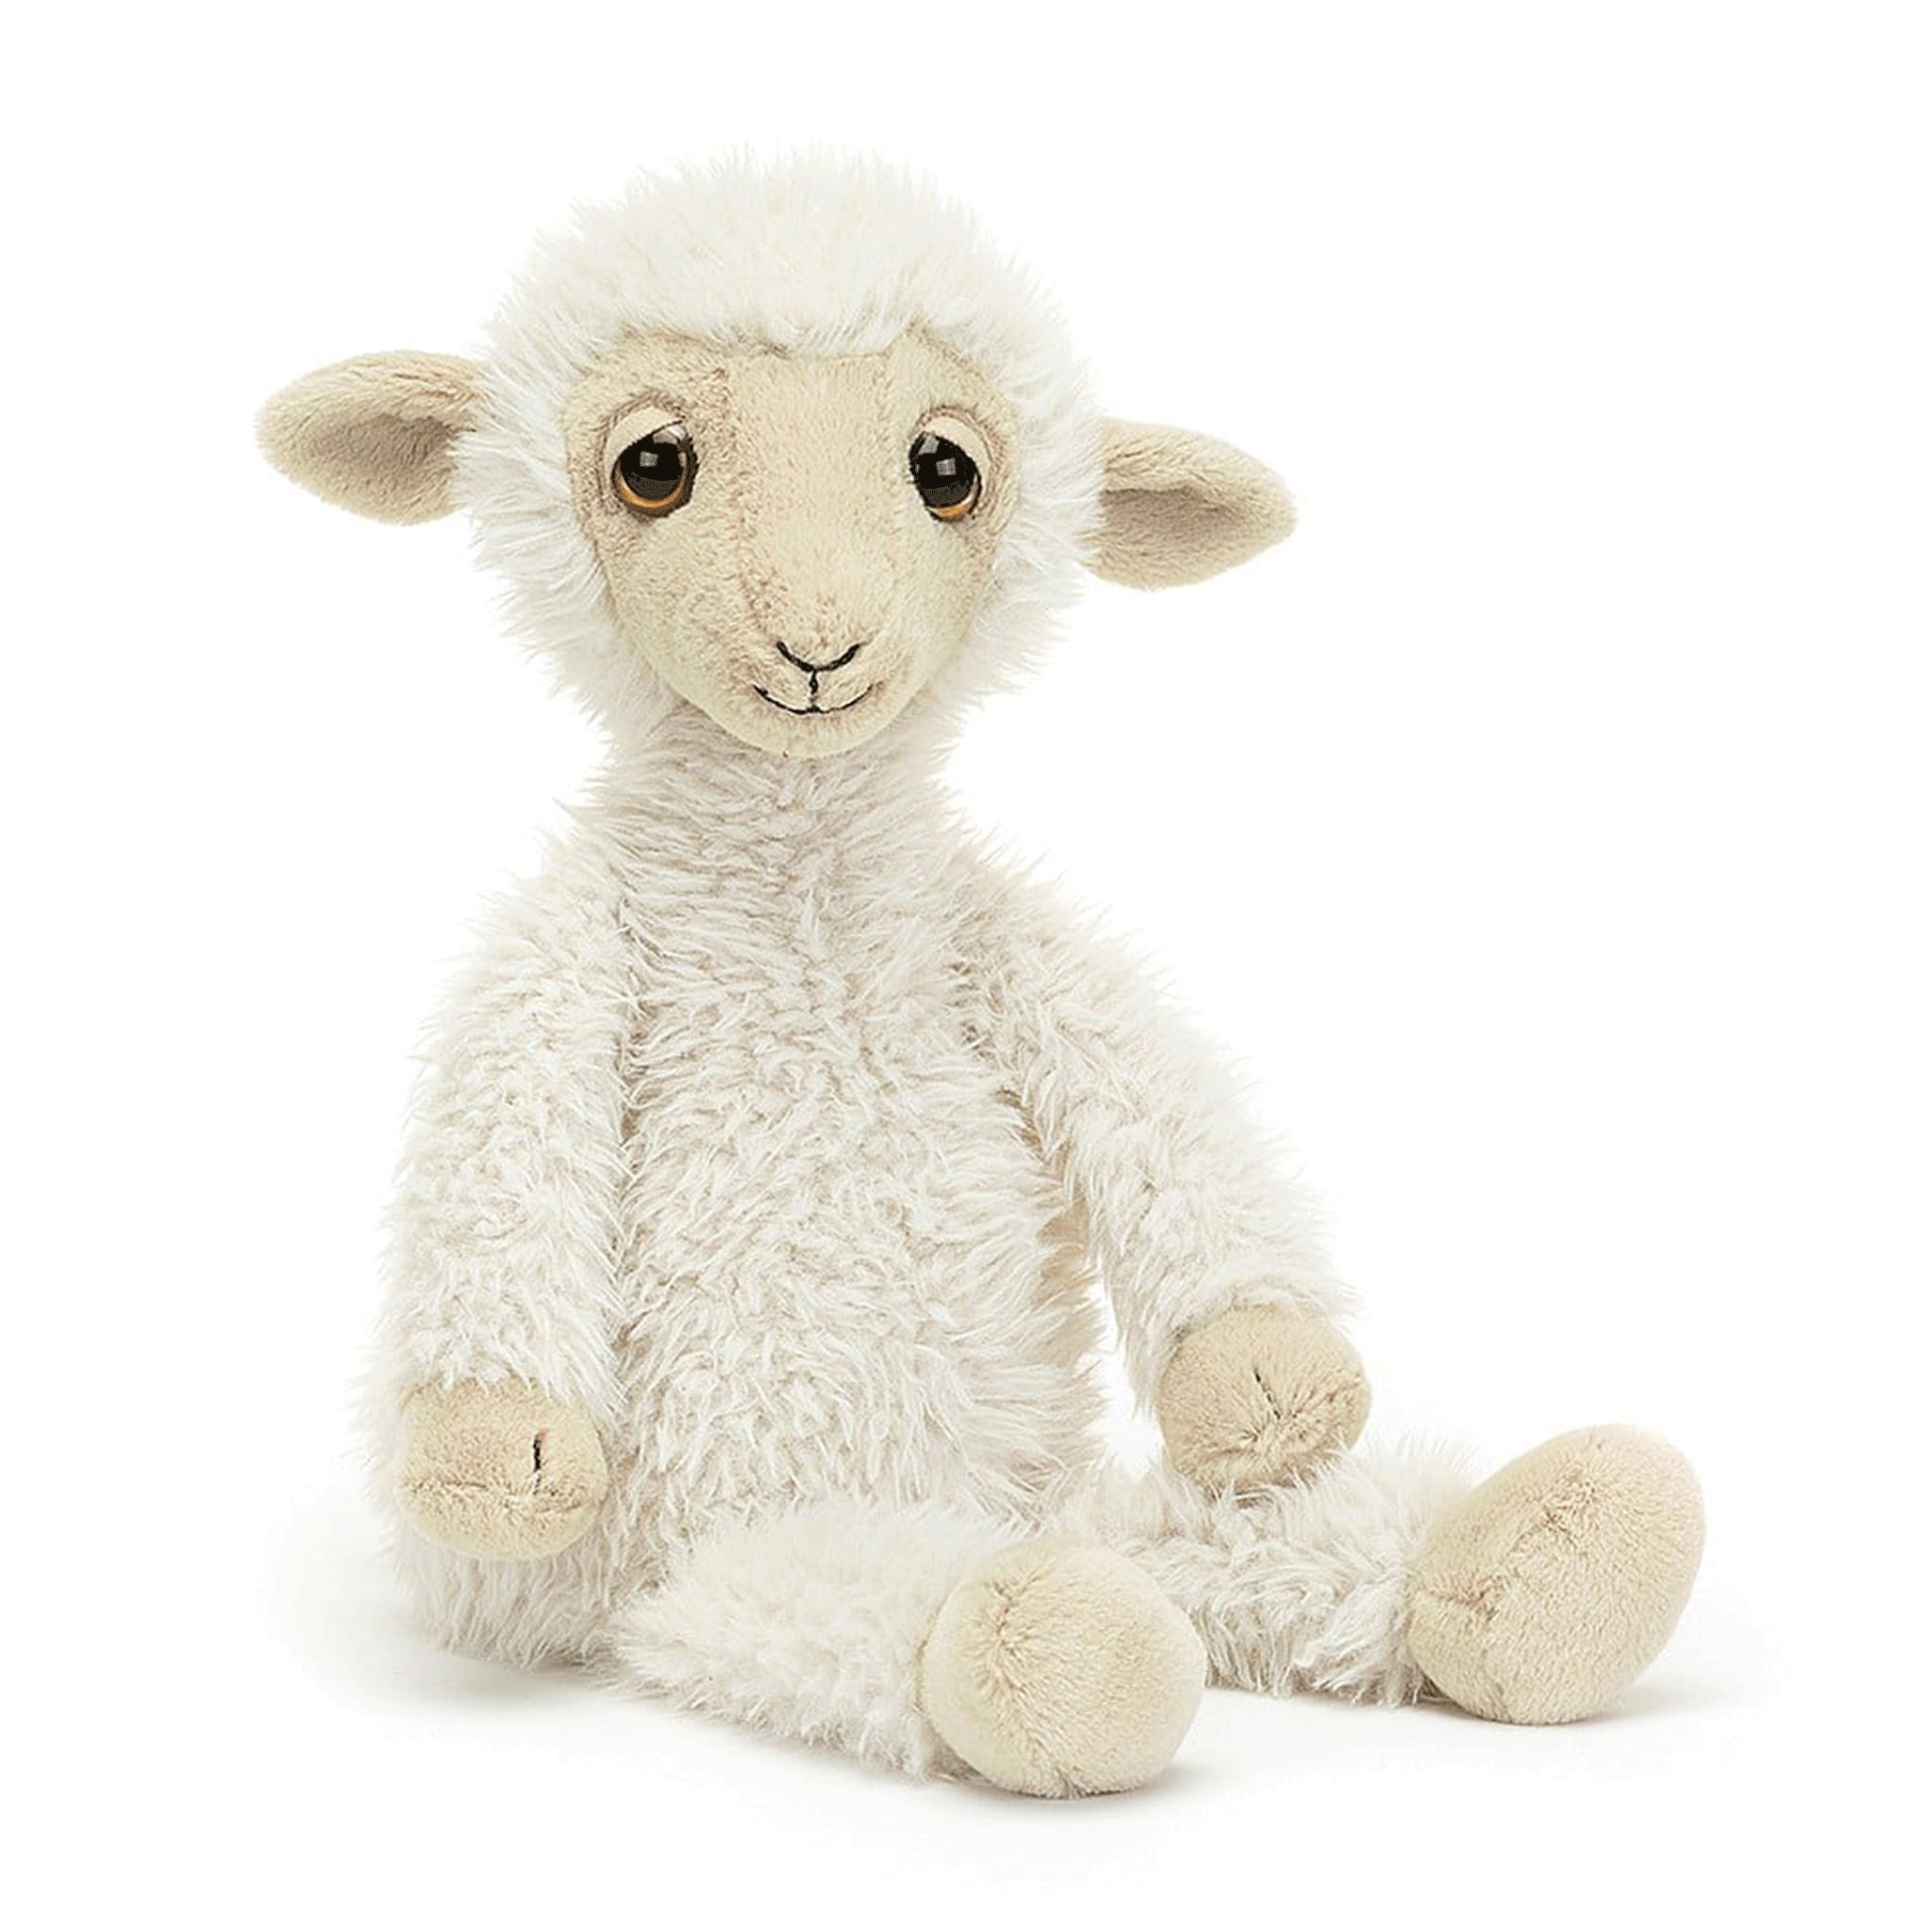 On a white background is an ivory stuffed animal sheep with sleepy eyes. 